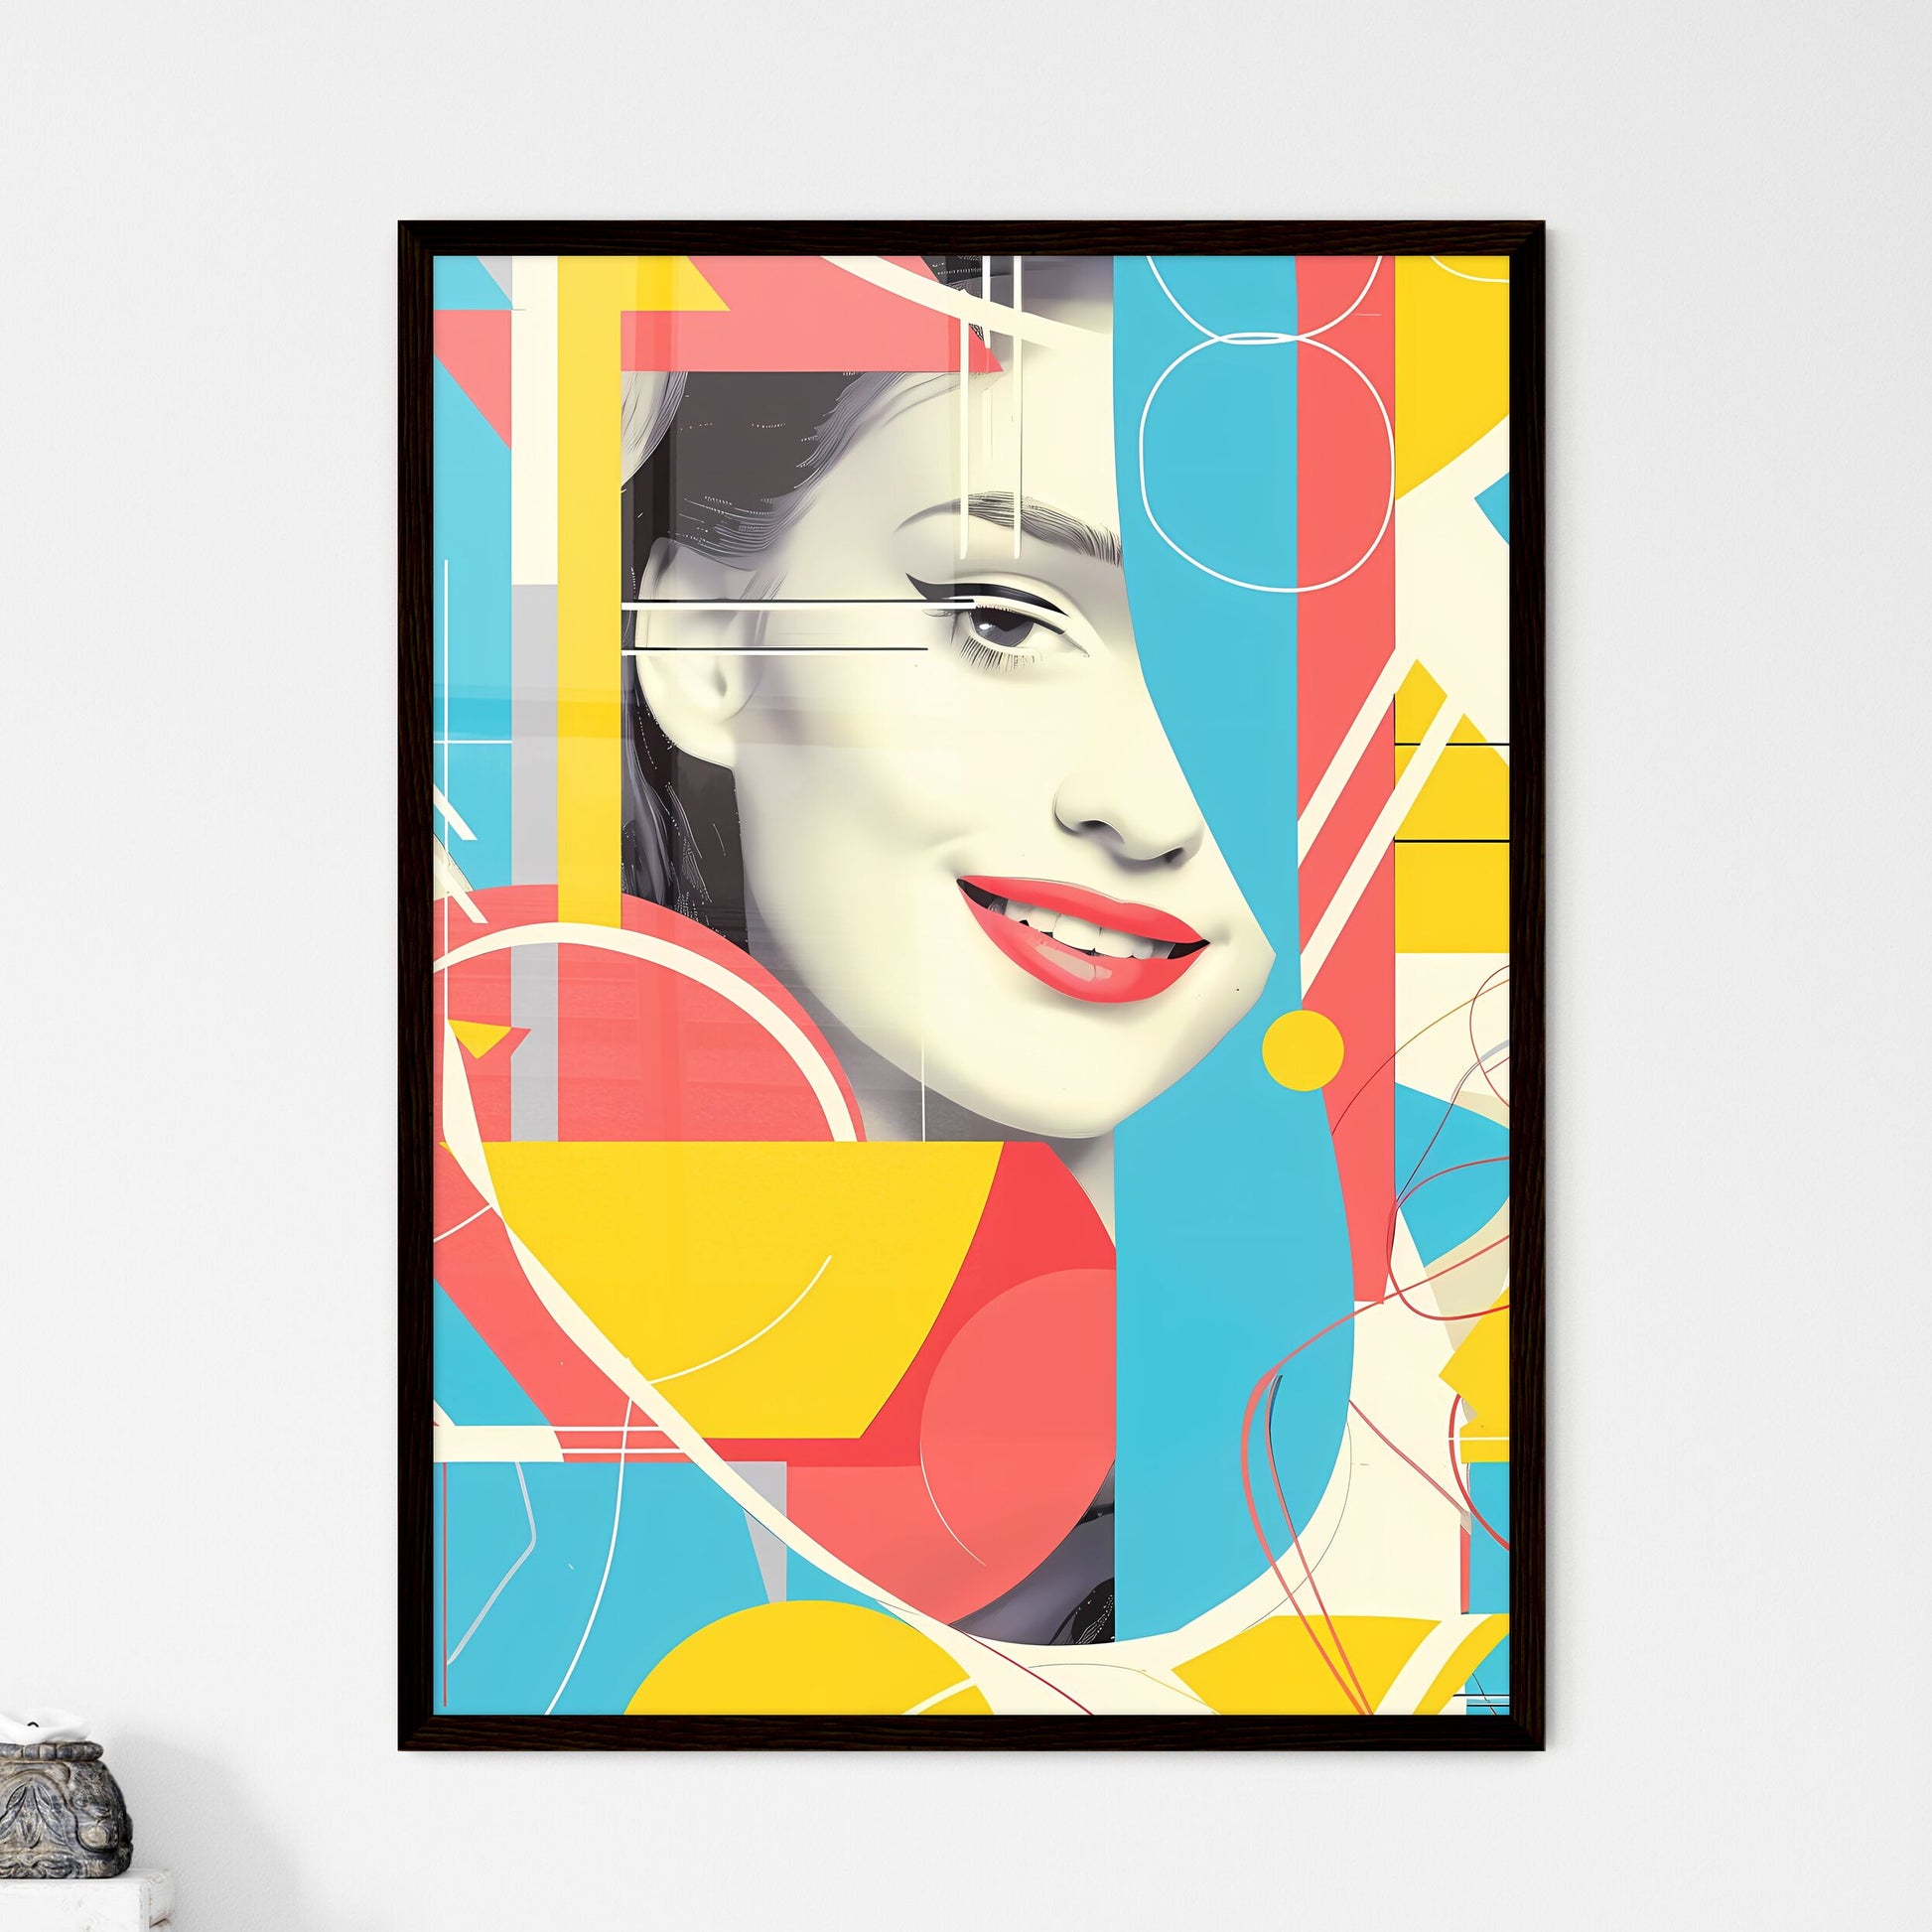 Fluid Lines and Shapes: Vibrant Neoclassical Face on Geometric Puzzle-like Background with Danish Pastels and Collaged Elements. Default Title